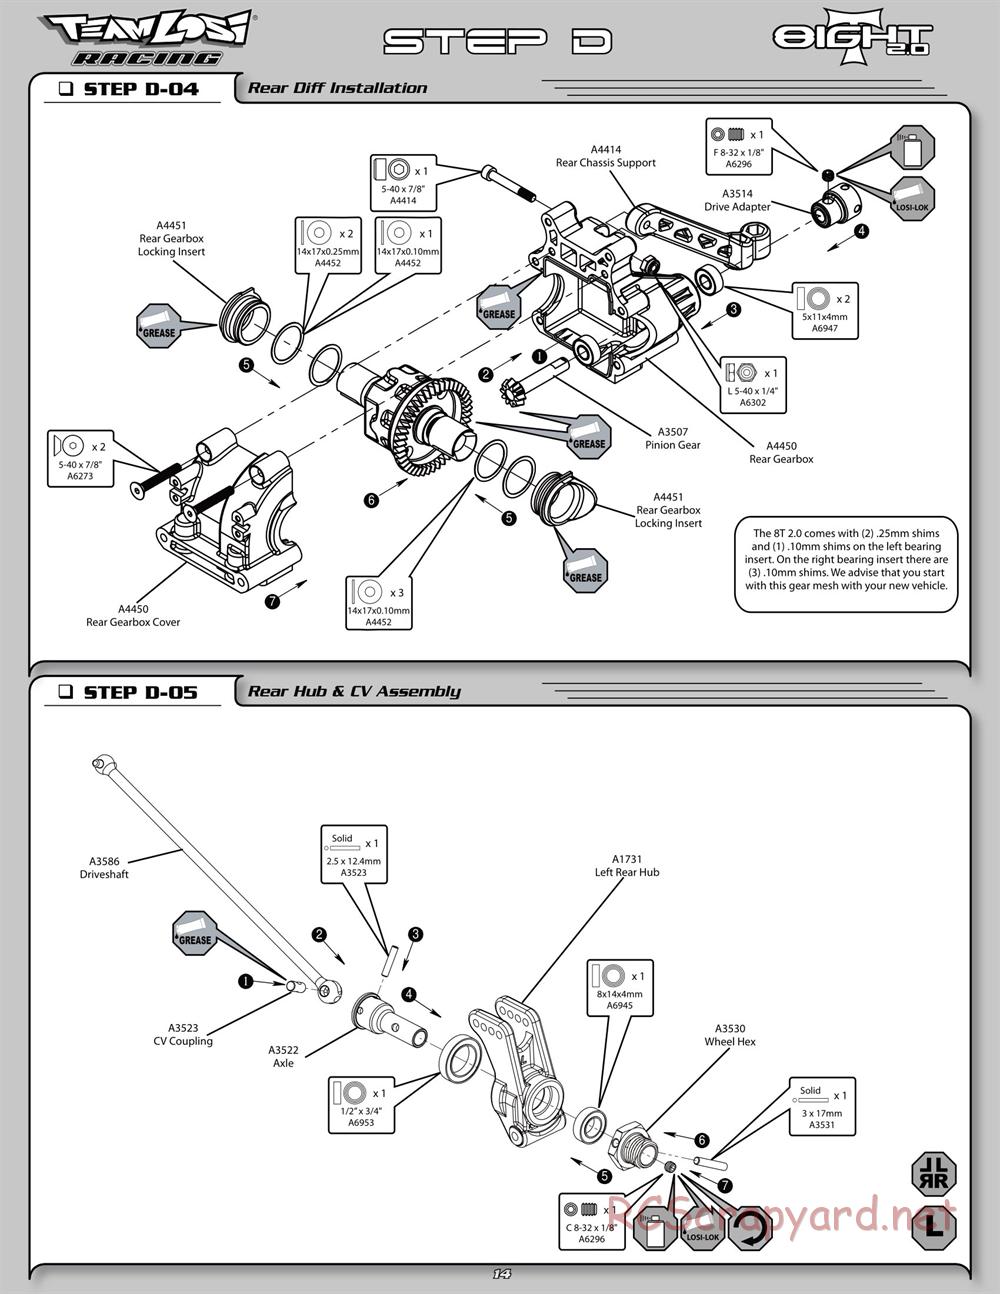 Team Losi - 8ight-T 2.0 Race Roller - Manual - Page 19